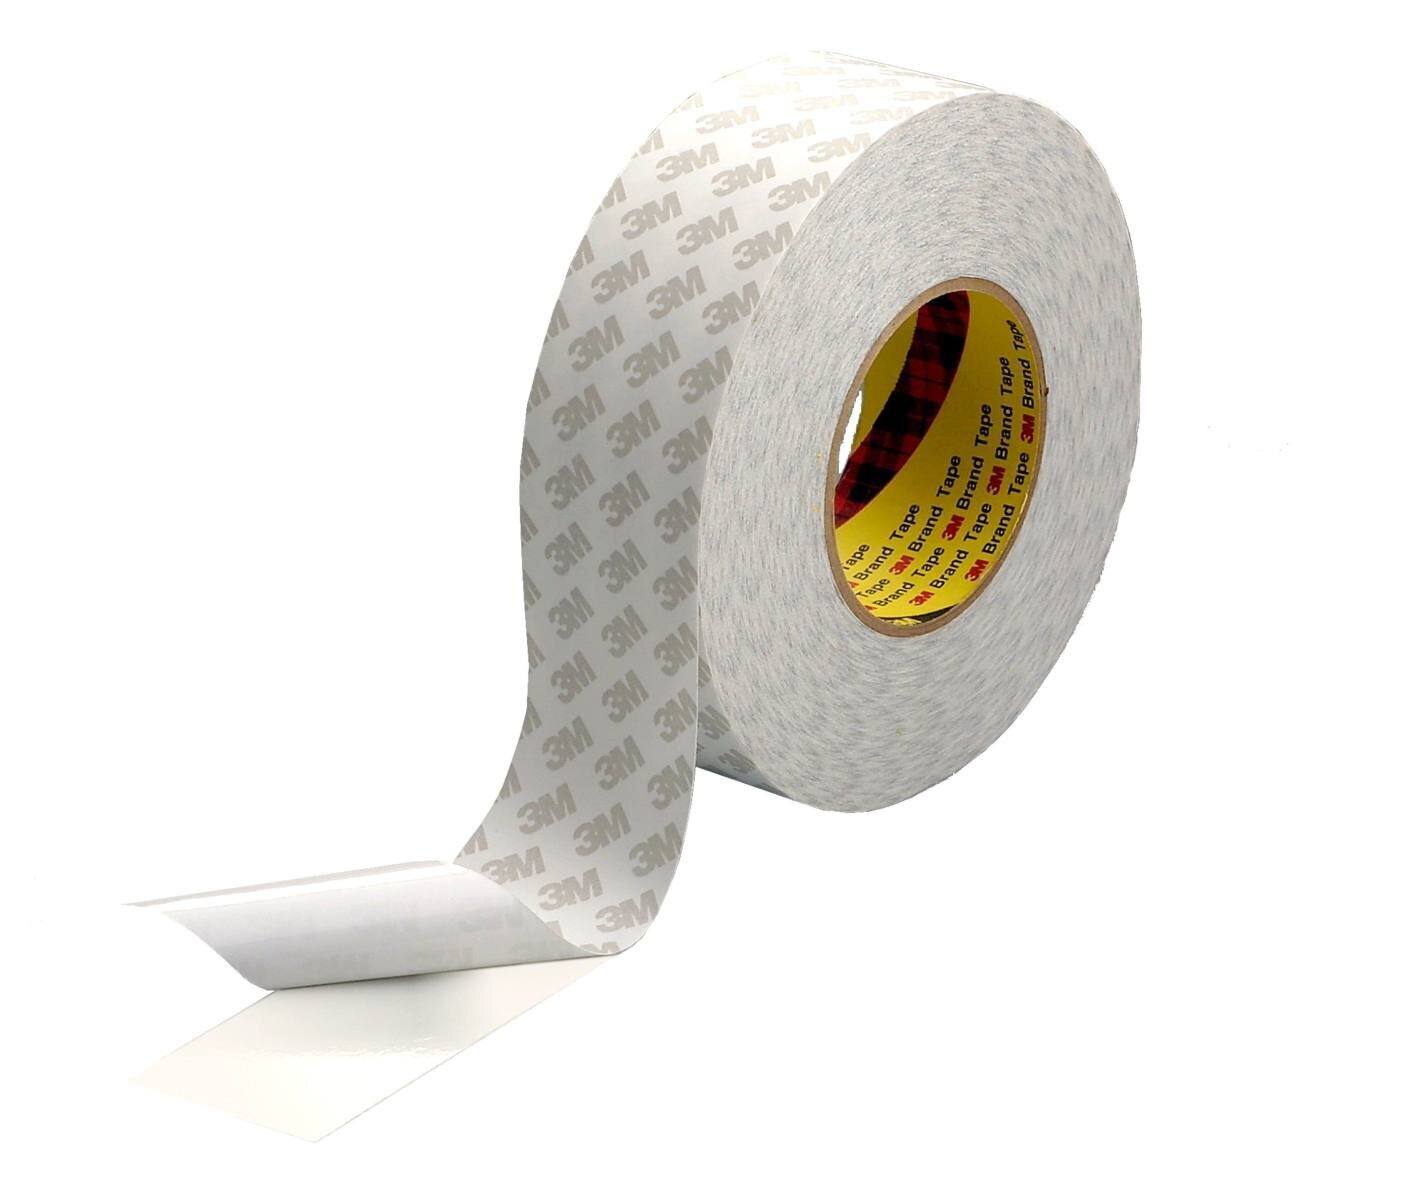 3M Double-sided adhesive tape with non-woven paper backing 9080HL, white, 50 mm x 50 m, 0.16 mm